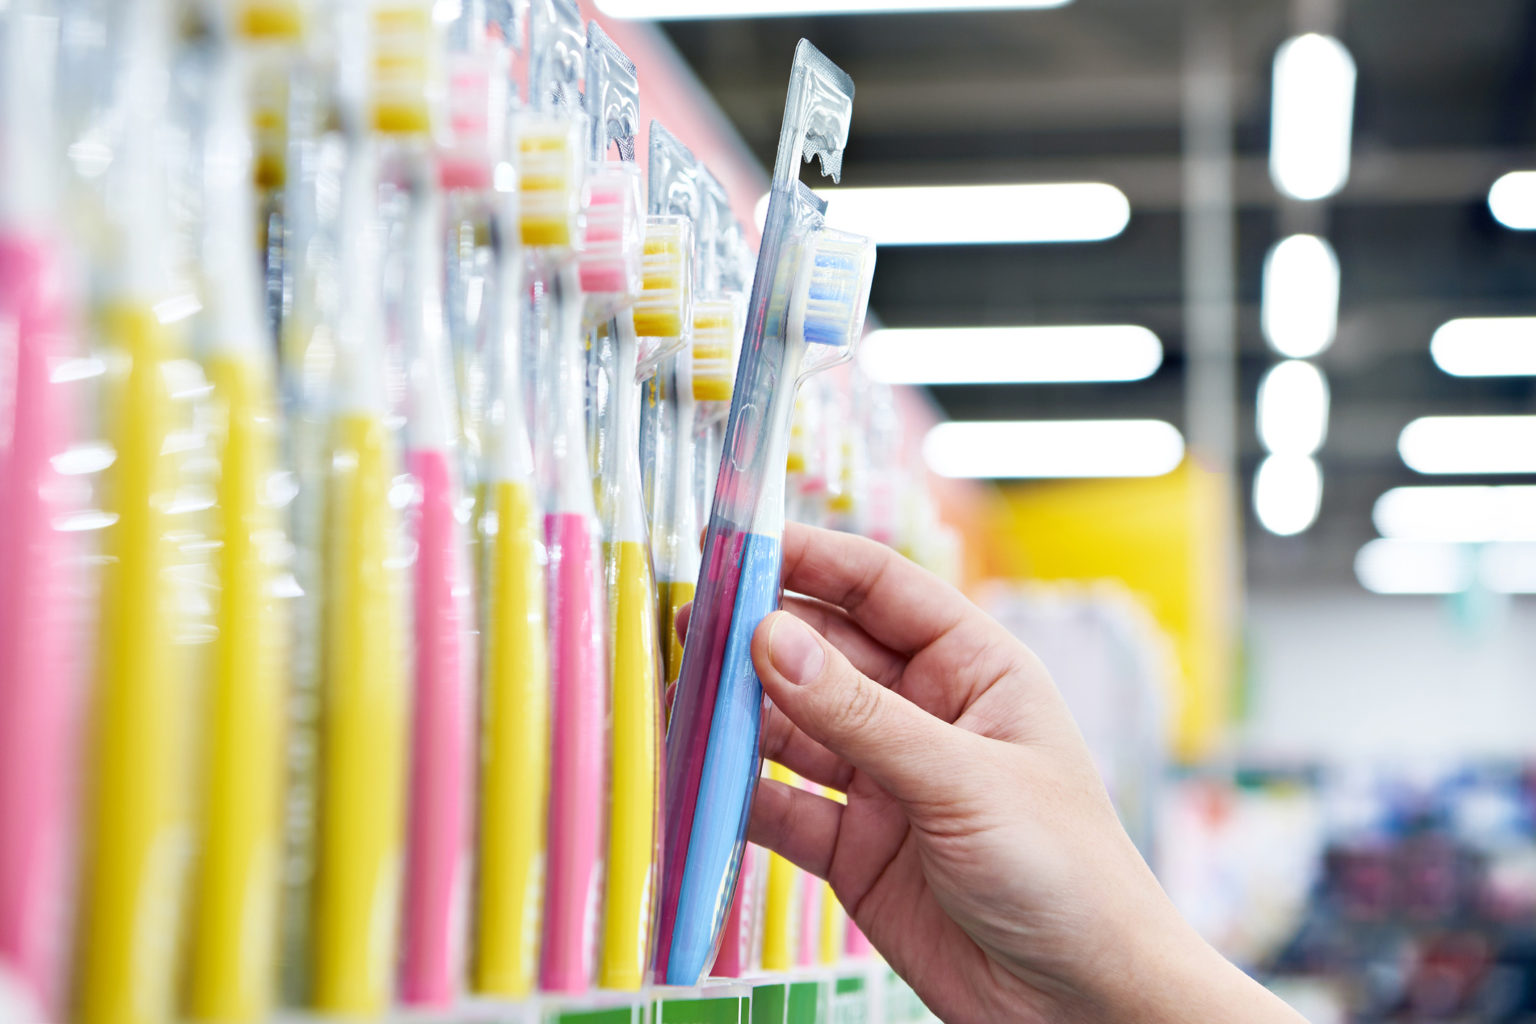 What to look for when buying a toothbrush